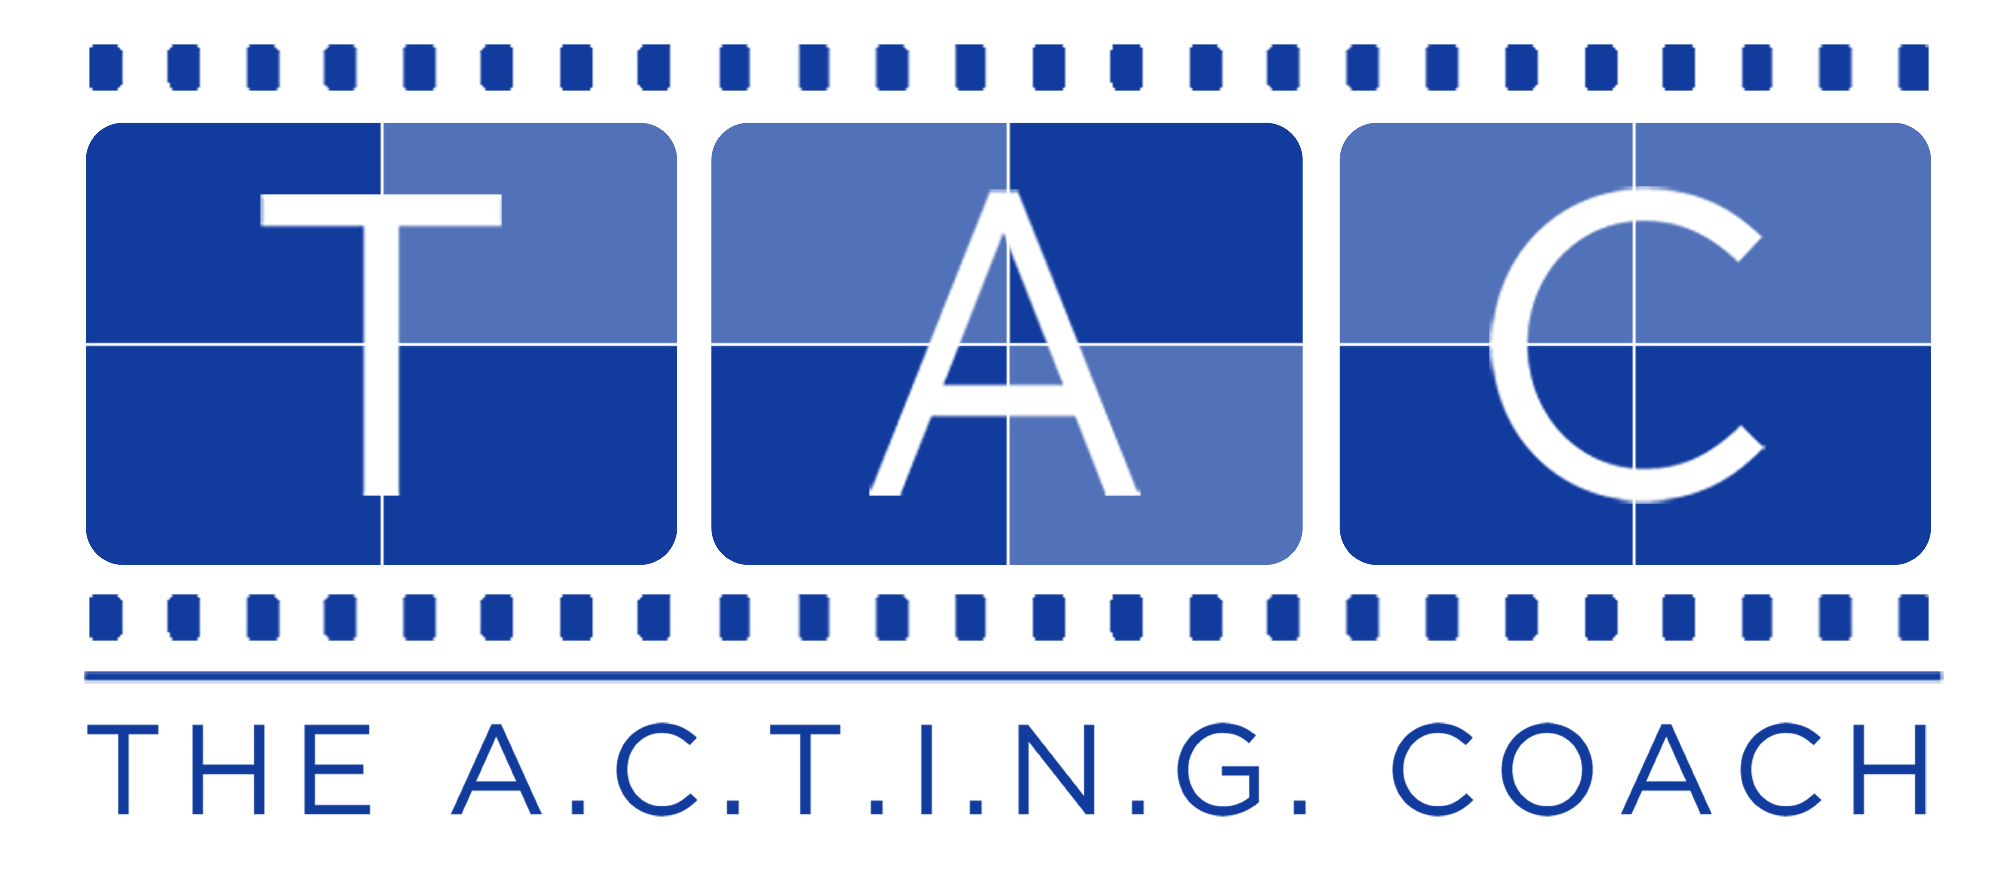 The A.C.T.I.N.G. Coach - Acting Workshops for Serious Actors